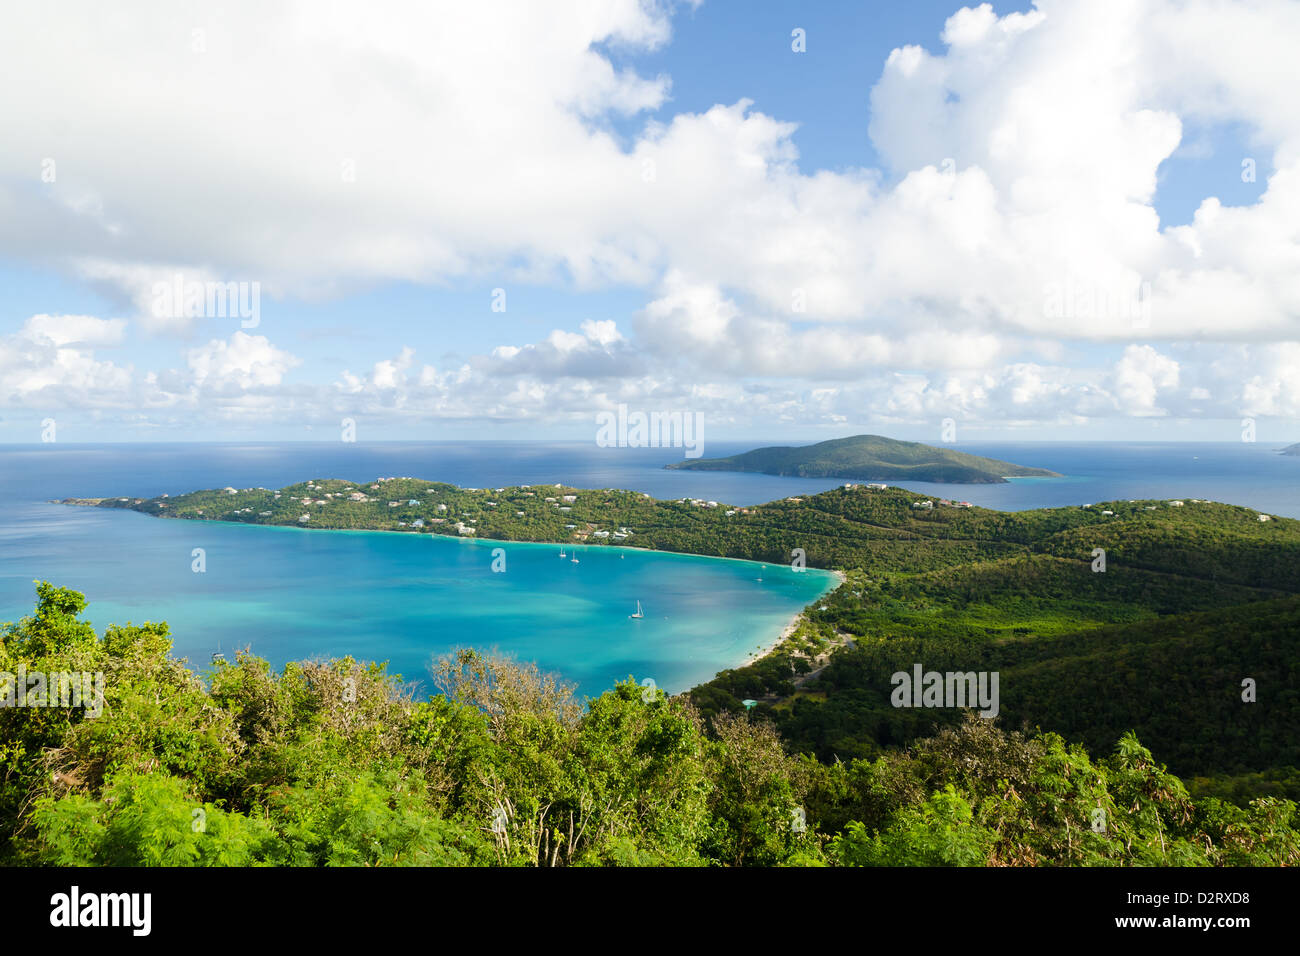 View of Magen,s Bay in St Thomas,  the US Virgin Islands from Drake's Seat vantage point Stock Photo